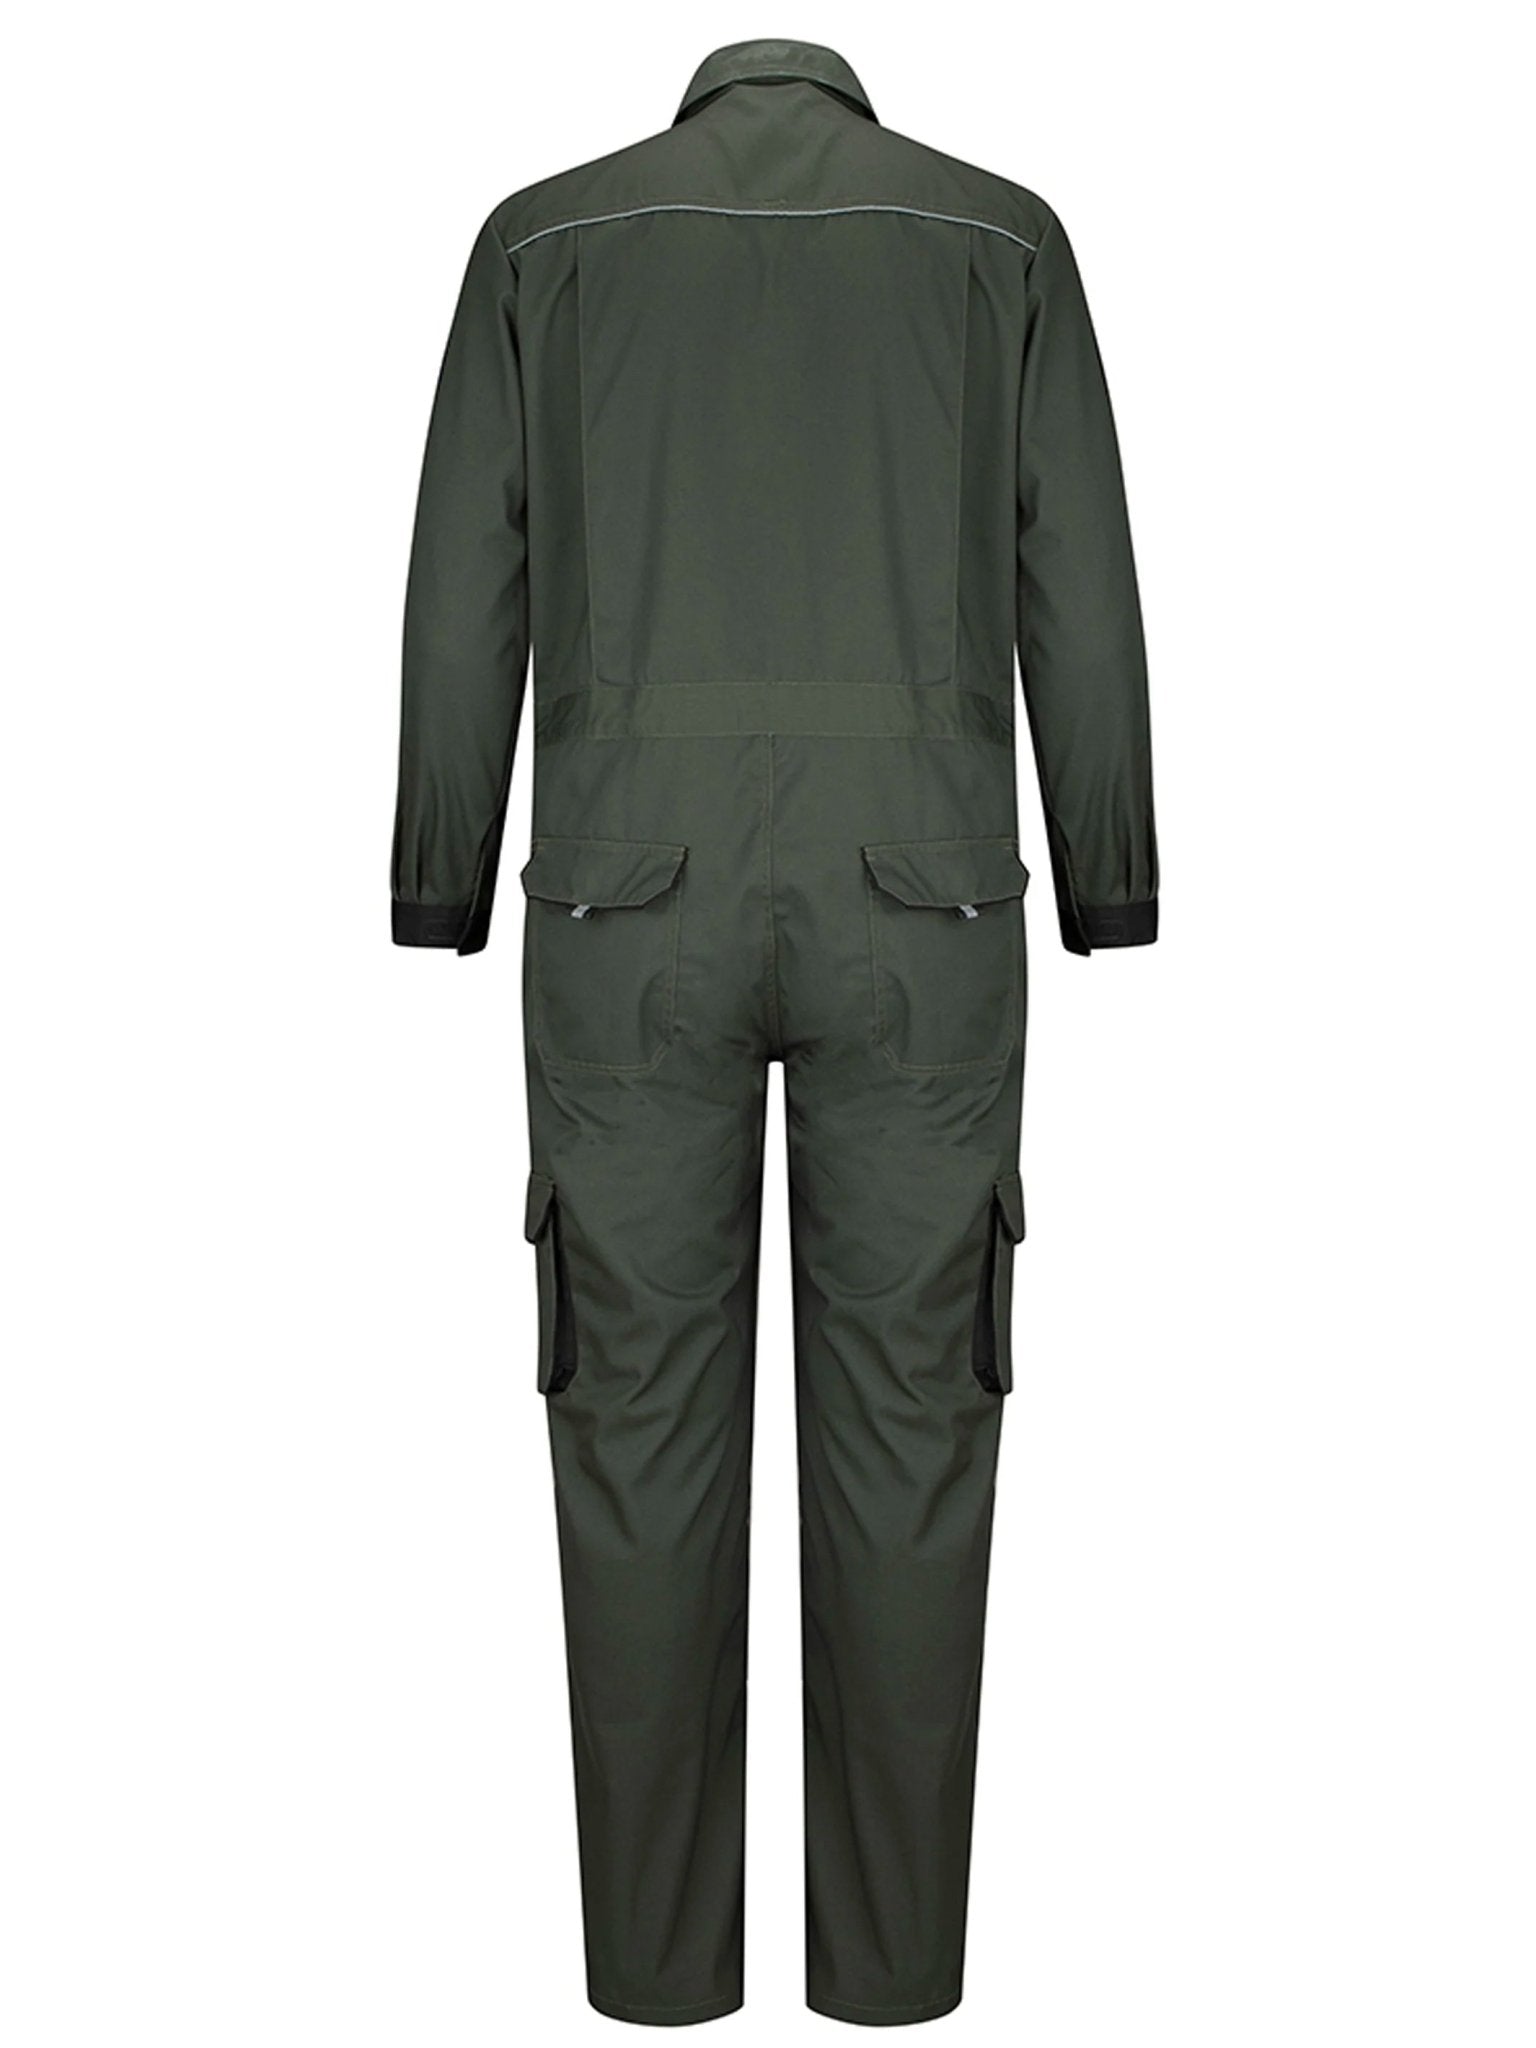 4elementsclothingHoggs of FifeHoggs of Fife - WorkHogg Coverall / Overalls / Boiler Suit with Zip entryWorkwearWCOV/GR/S1 - 429